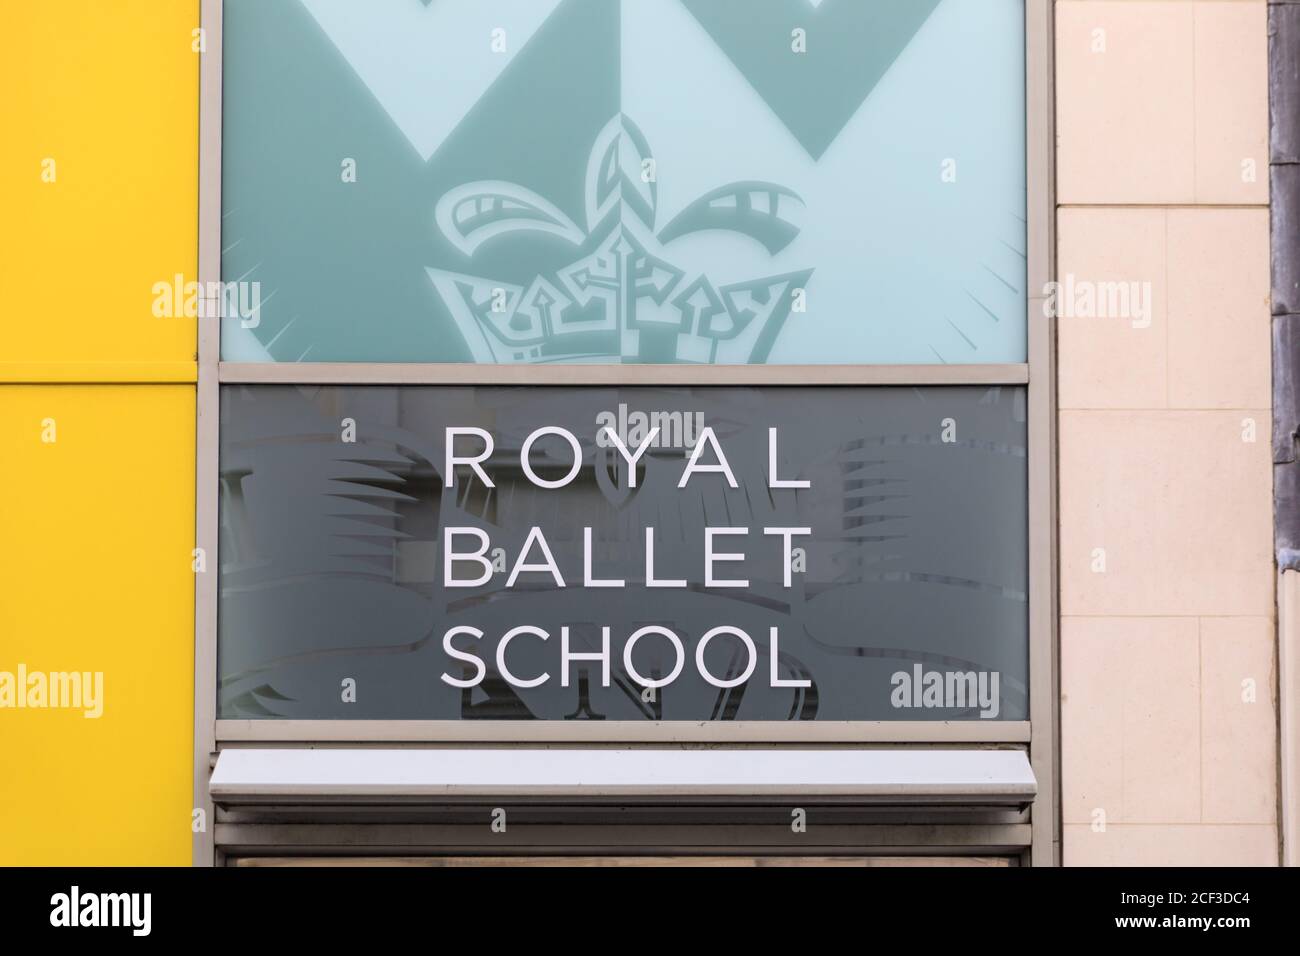 The Royal Ballet School exterior sign on building in Floral Street, Covent Garden, London, England, UK Stock Photo